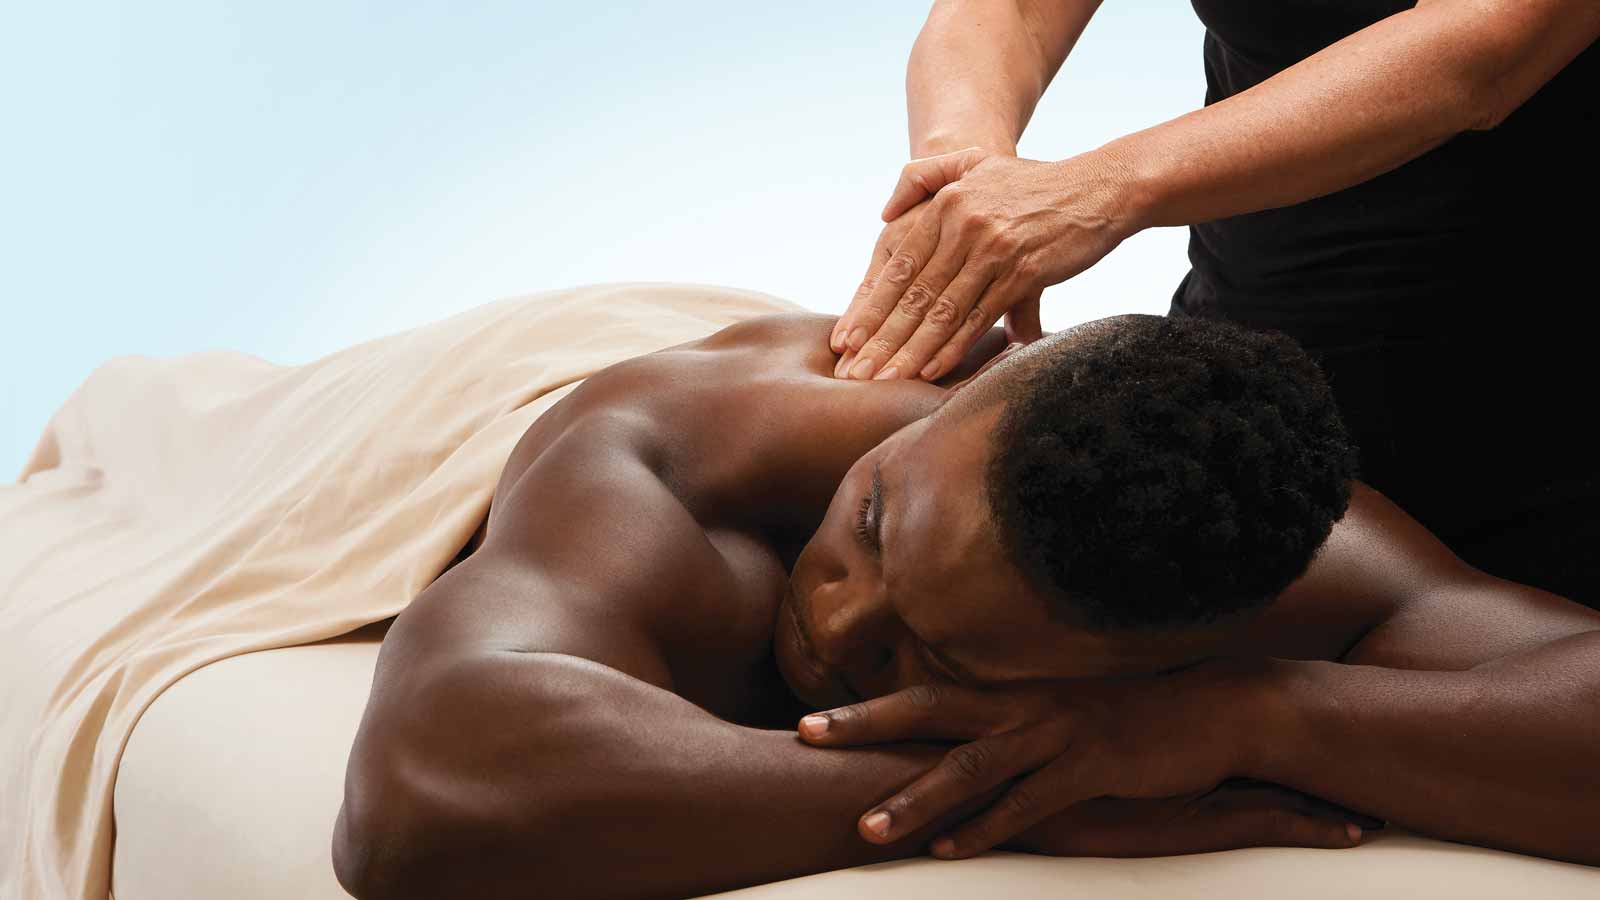 A client covered by a sheet lying face down on a massage table while a massage therapist presses their hands onto his back